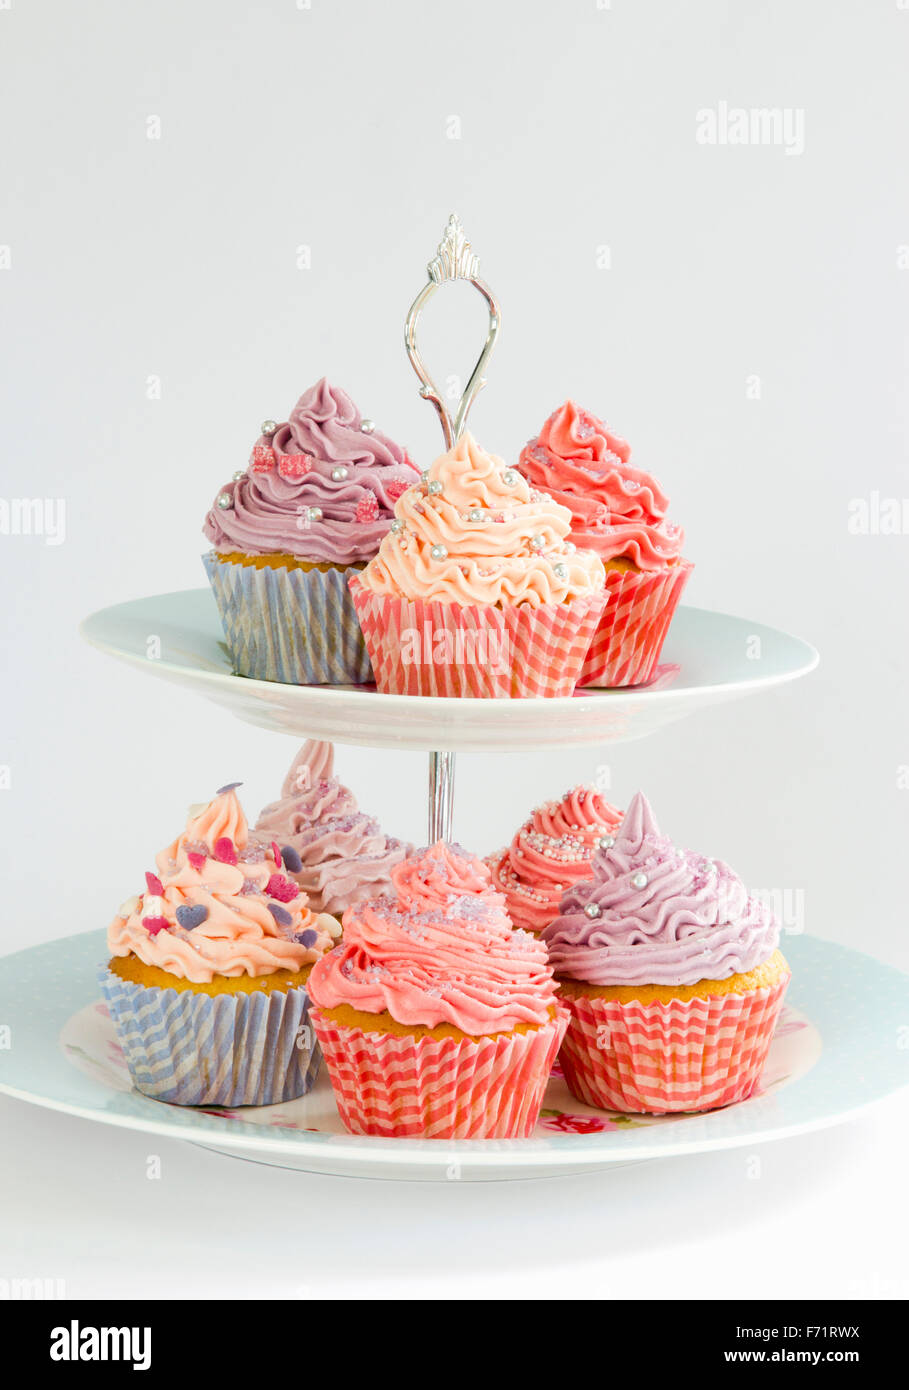 Assorted cupcakes on a tiered stand Stock Photo